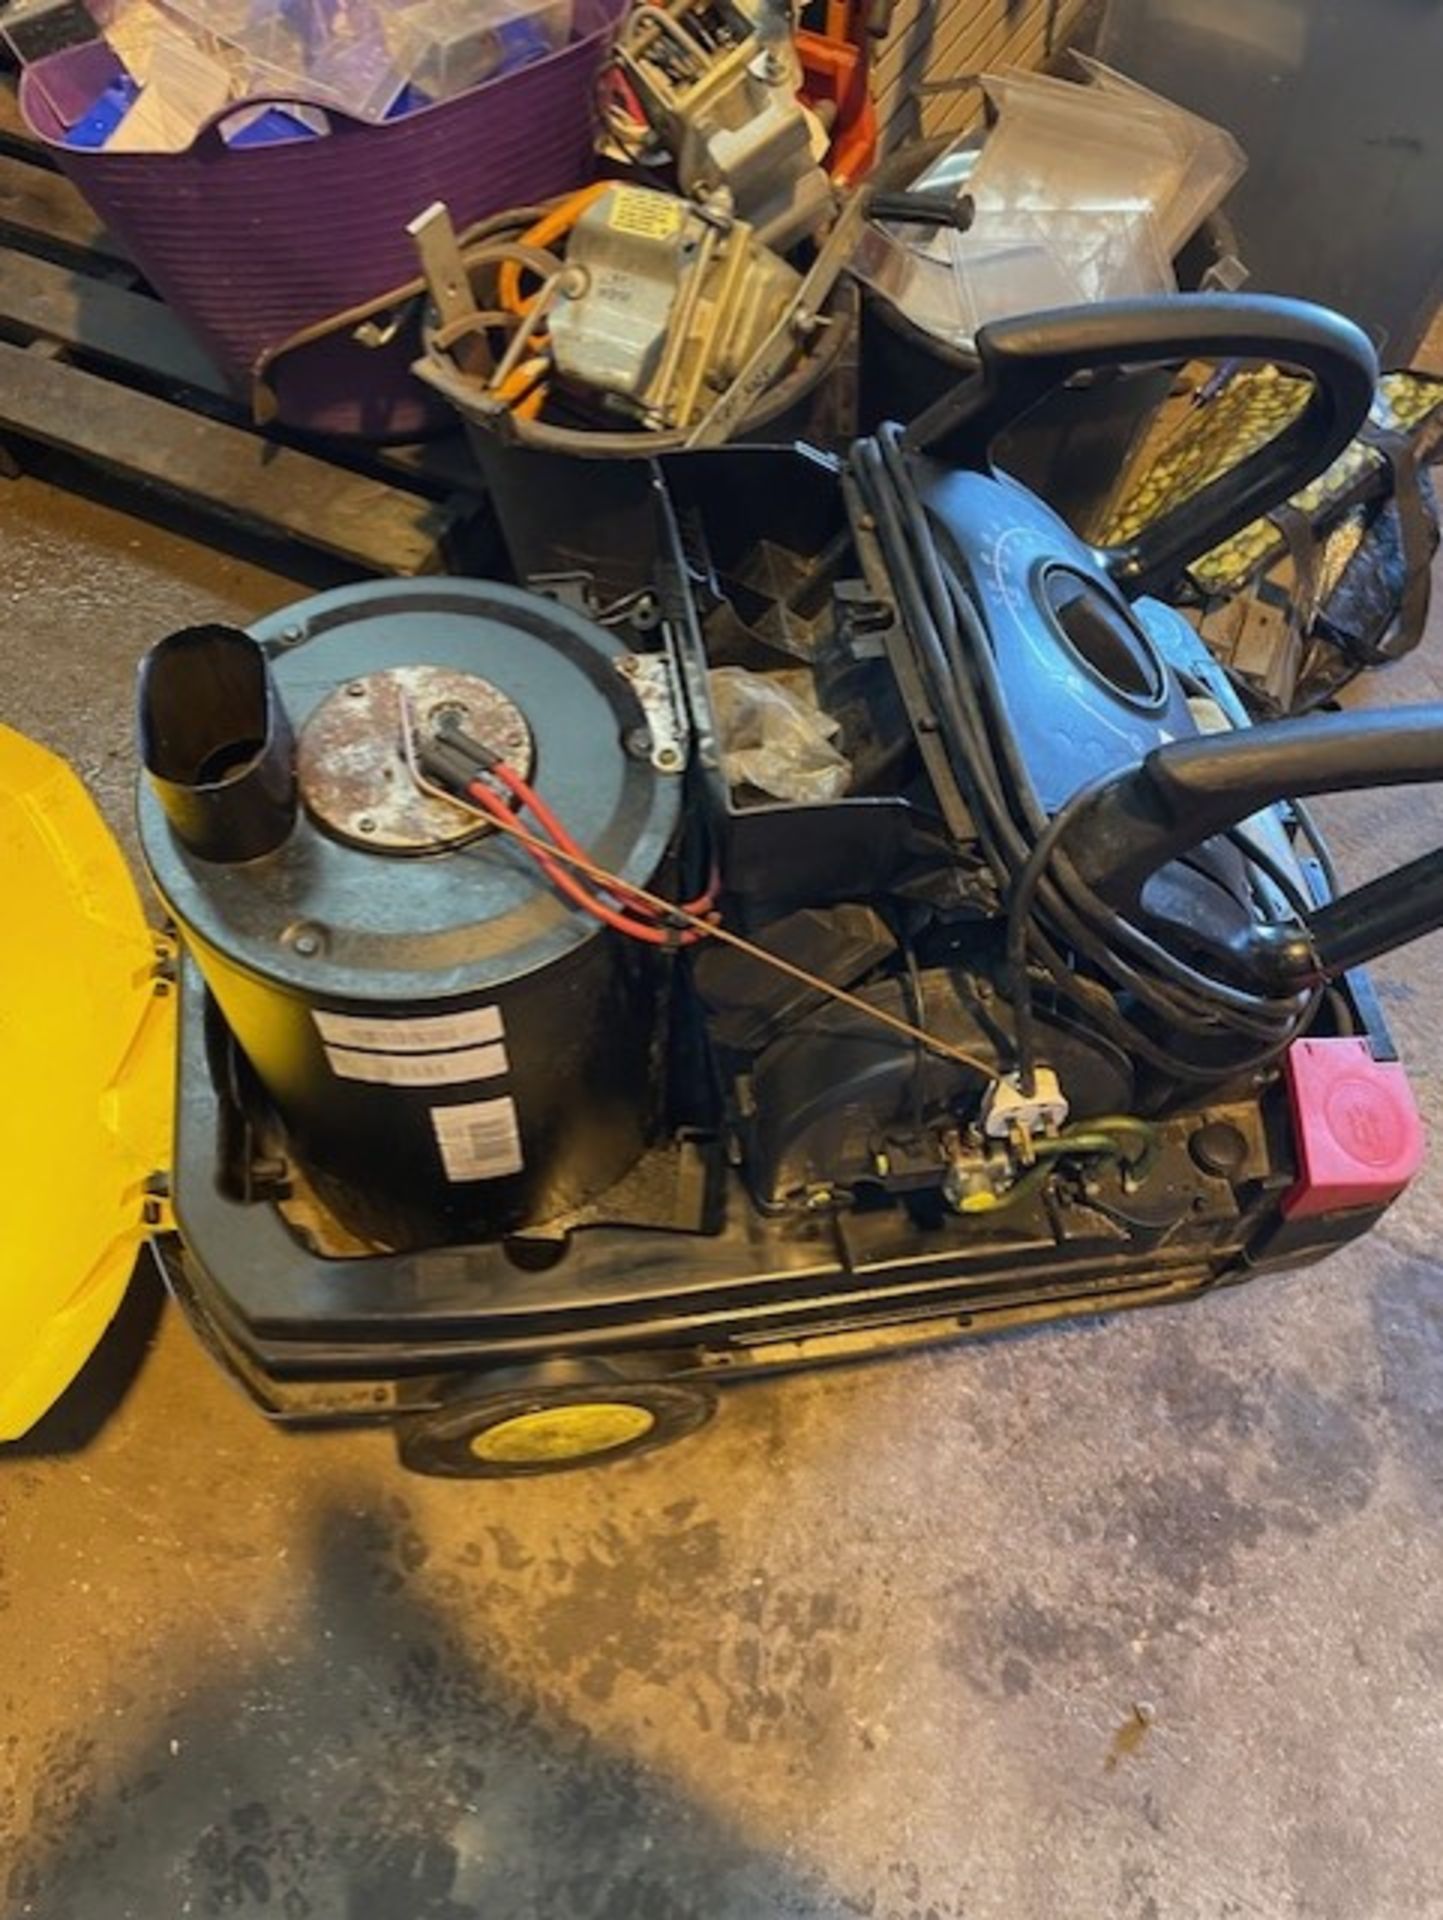 Karcher hot and cold pressure washer hds551 c model it’s in good condition still comes with hose and - Image 8 of 10